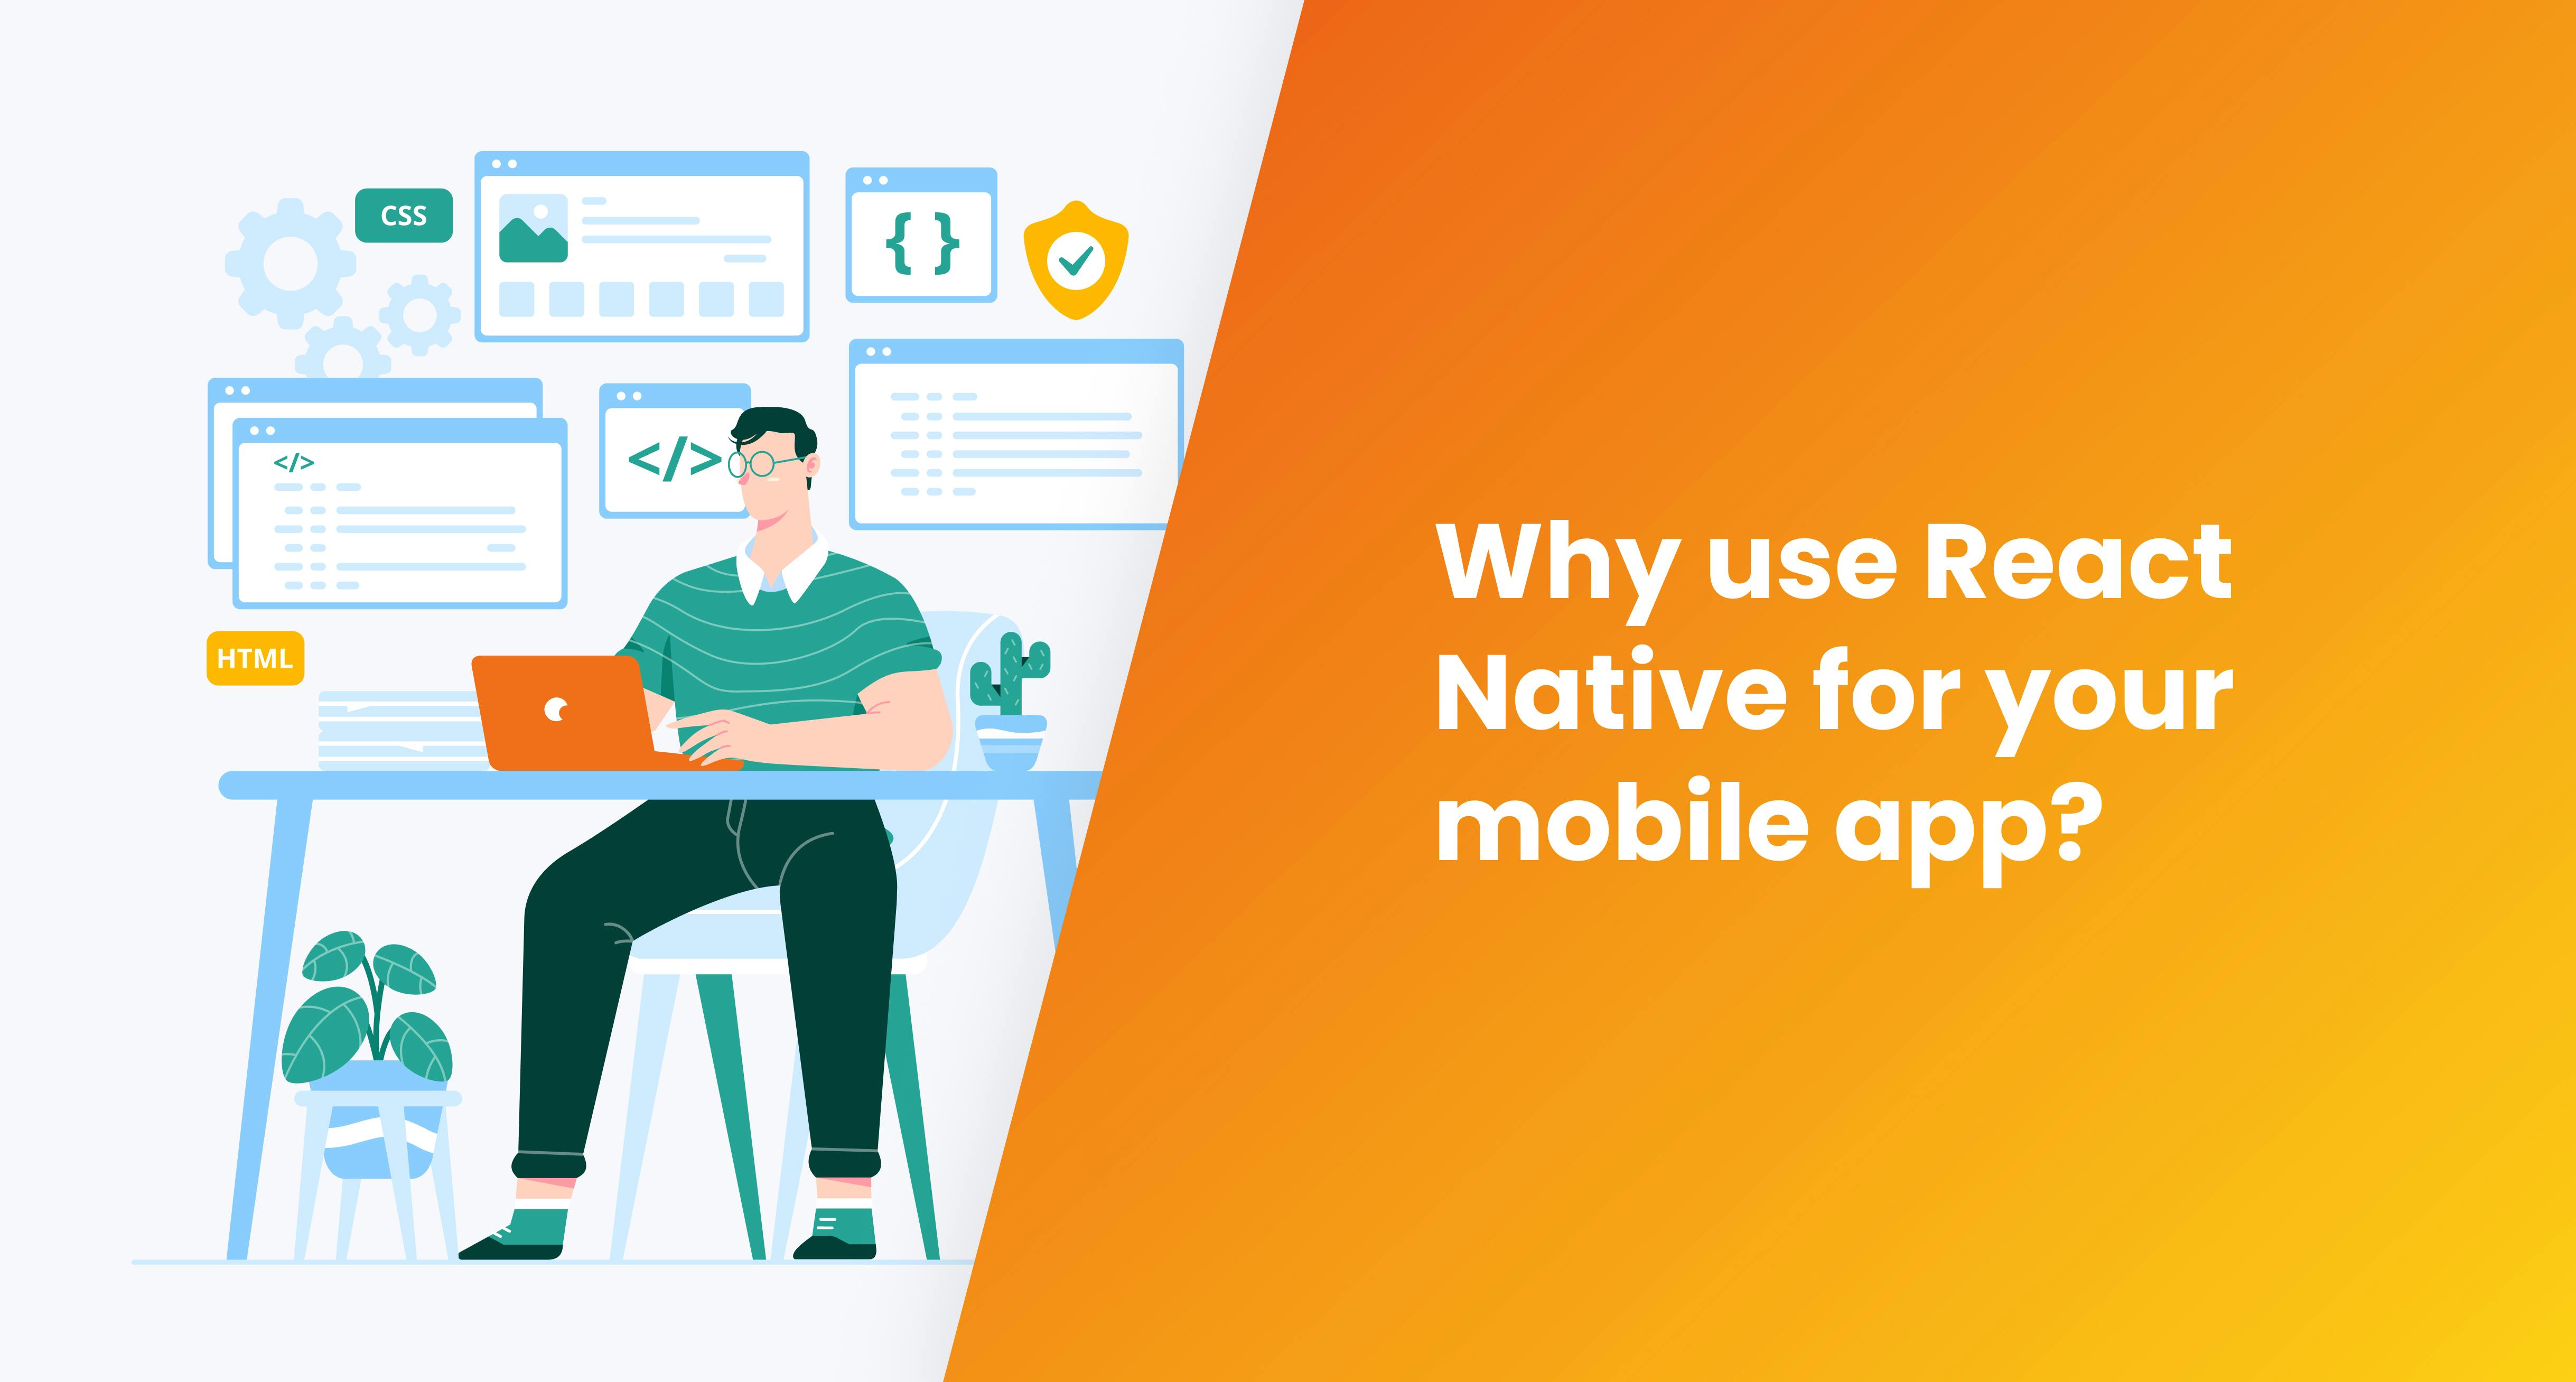 Nightborn - Why use React Native for your mobile app?